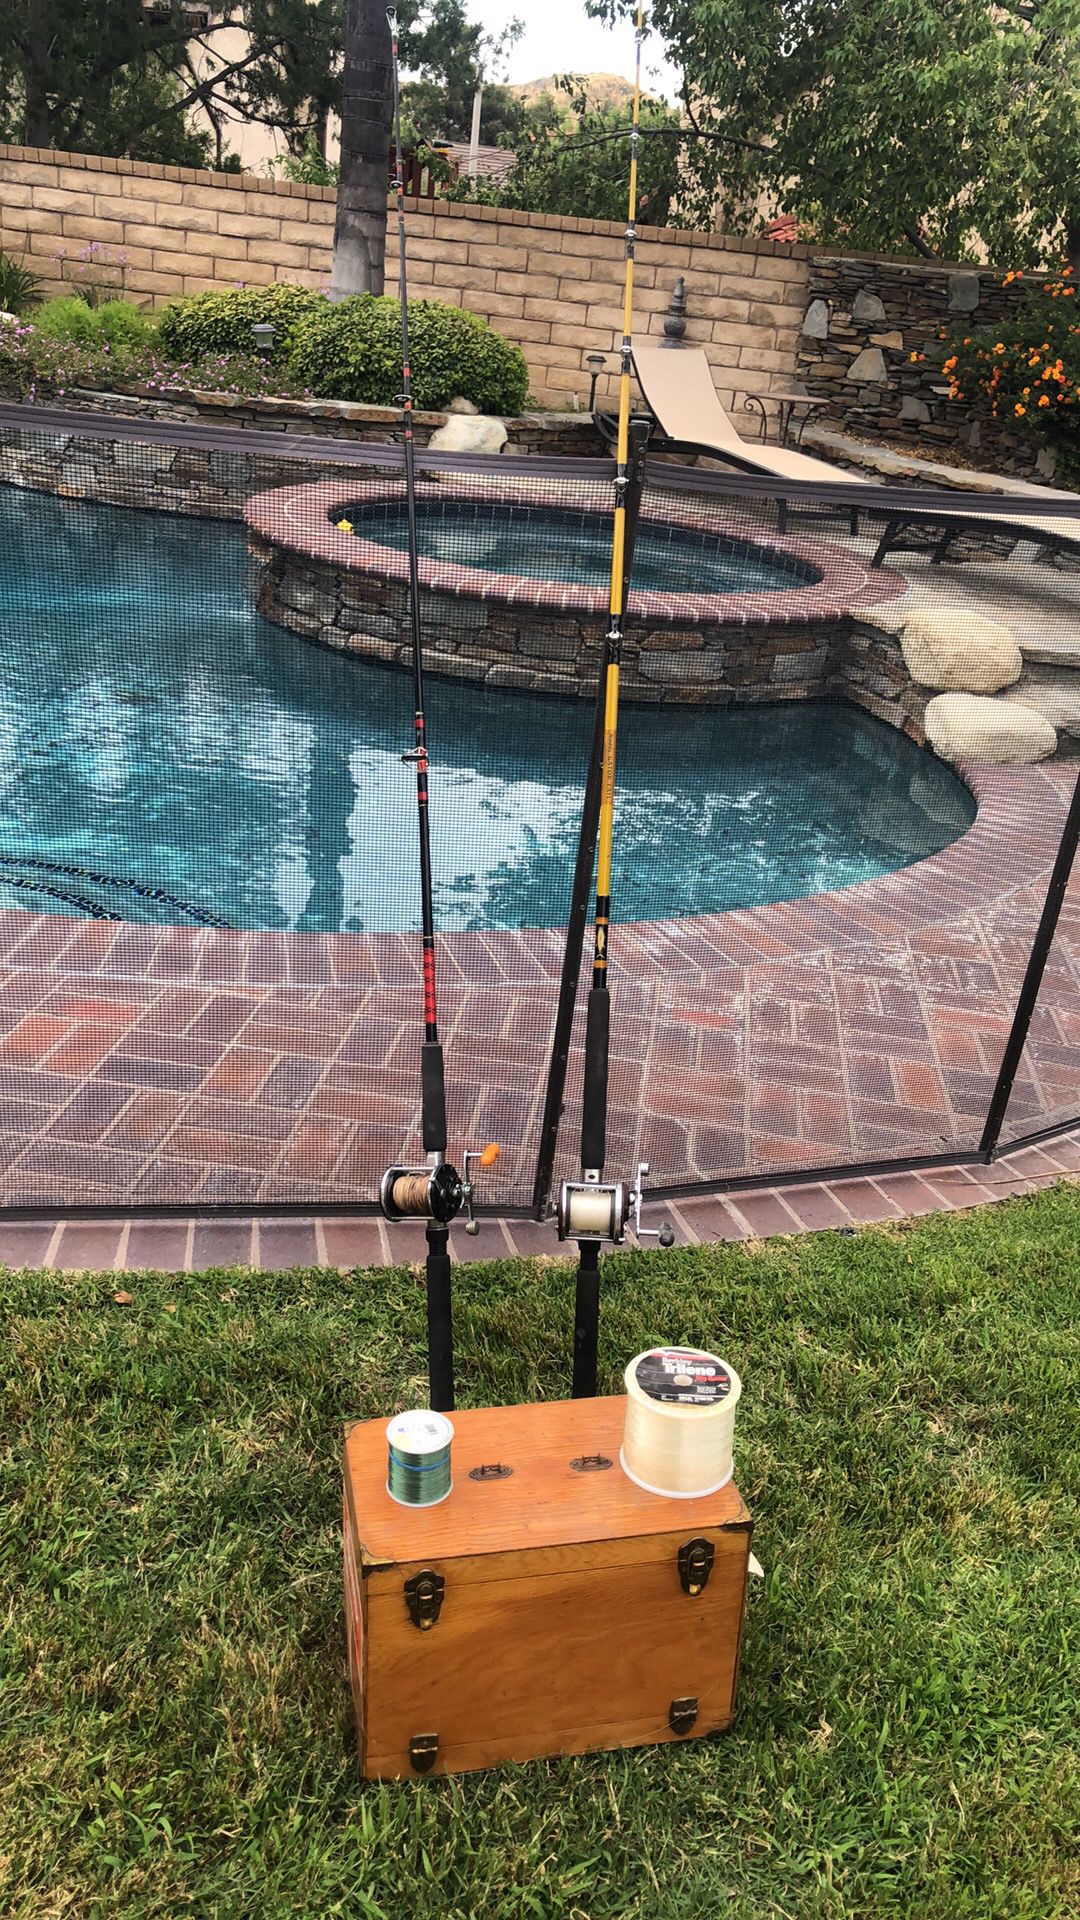 Two Saltwater Fishing Rods with Penn Reels with Wood Tackle Box full of lures,Jigs,2 spools of line.